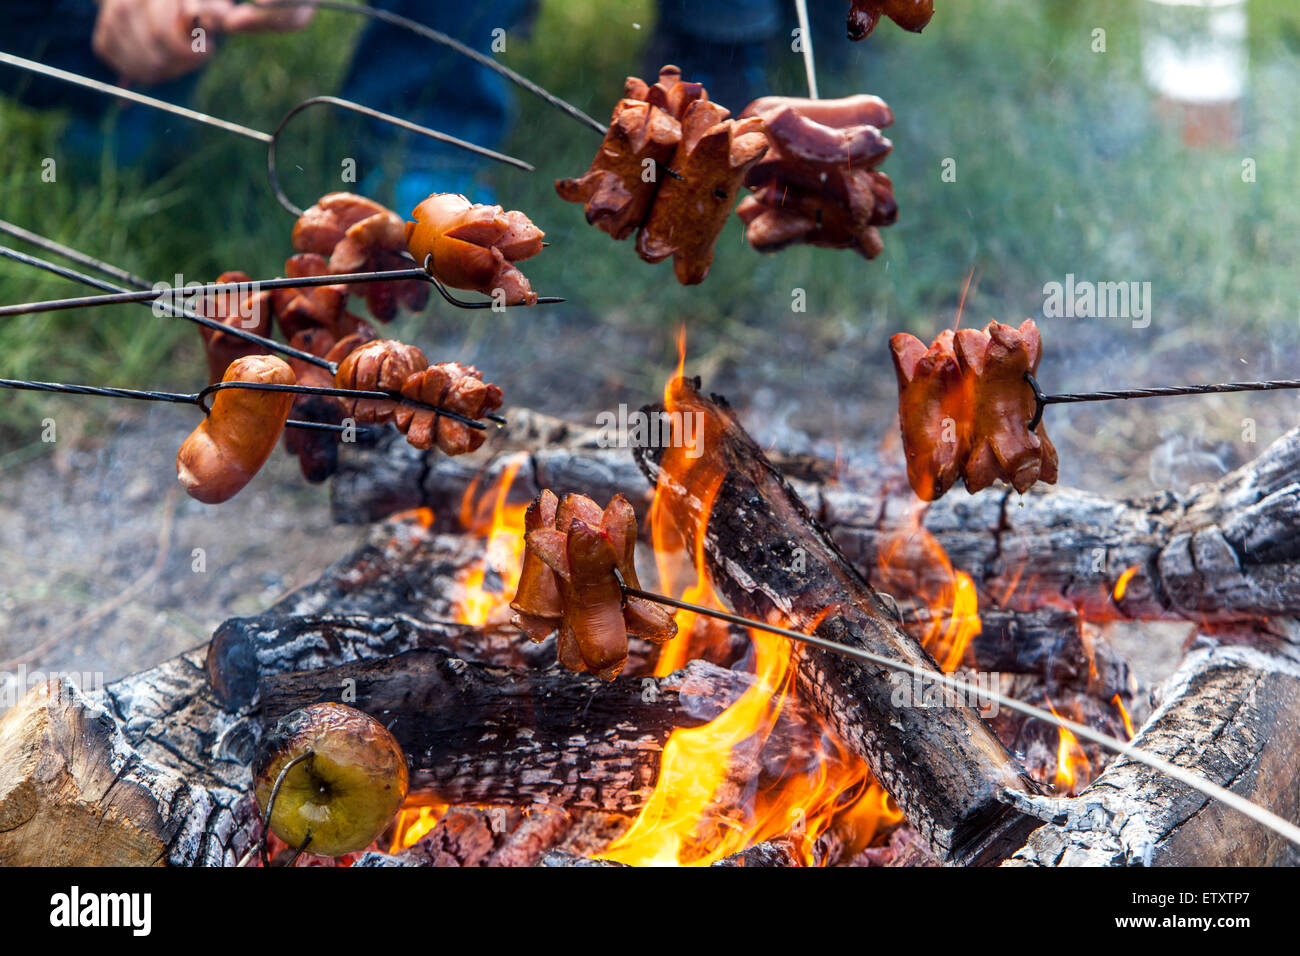 Sausage on stick over fire, bonfire party Stock Photo